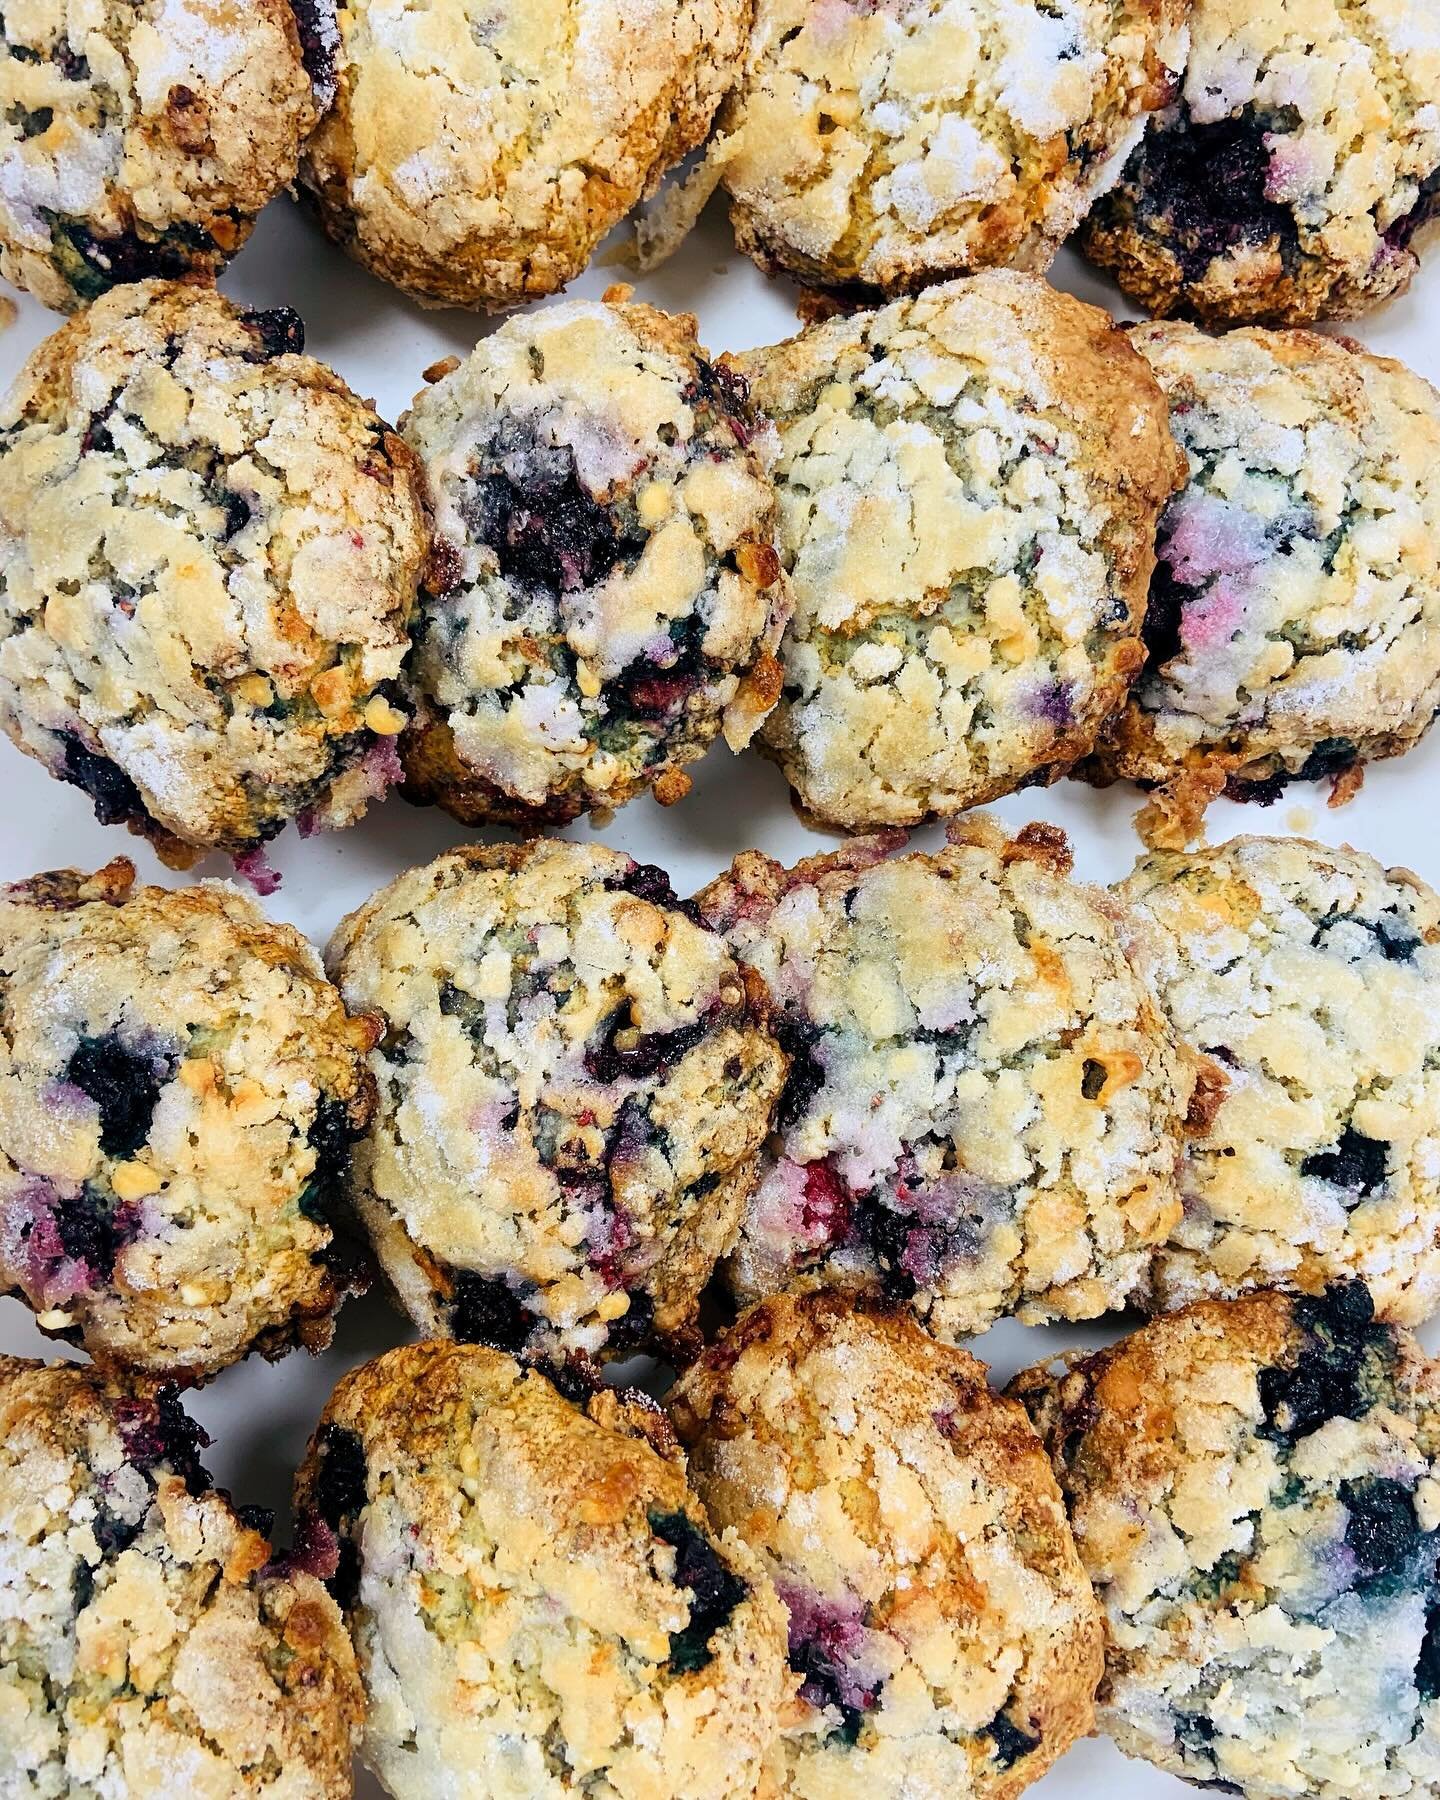 Mixed Berry White Chocolate Scones 😋

A staple from day one in our pastry case, in the rotation Monday, Wednesday, Friday &amp; Sunday!

#scones #pastrylove #yegcafe #treatyourself